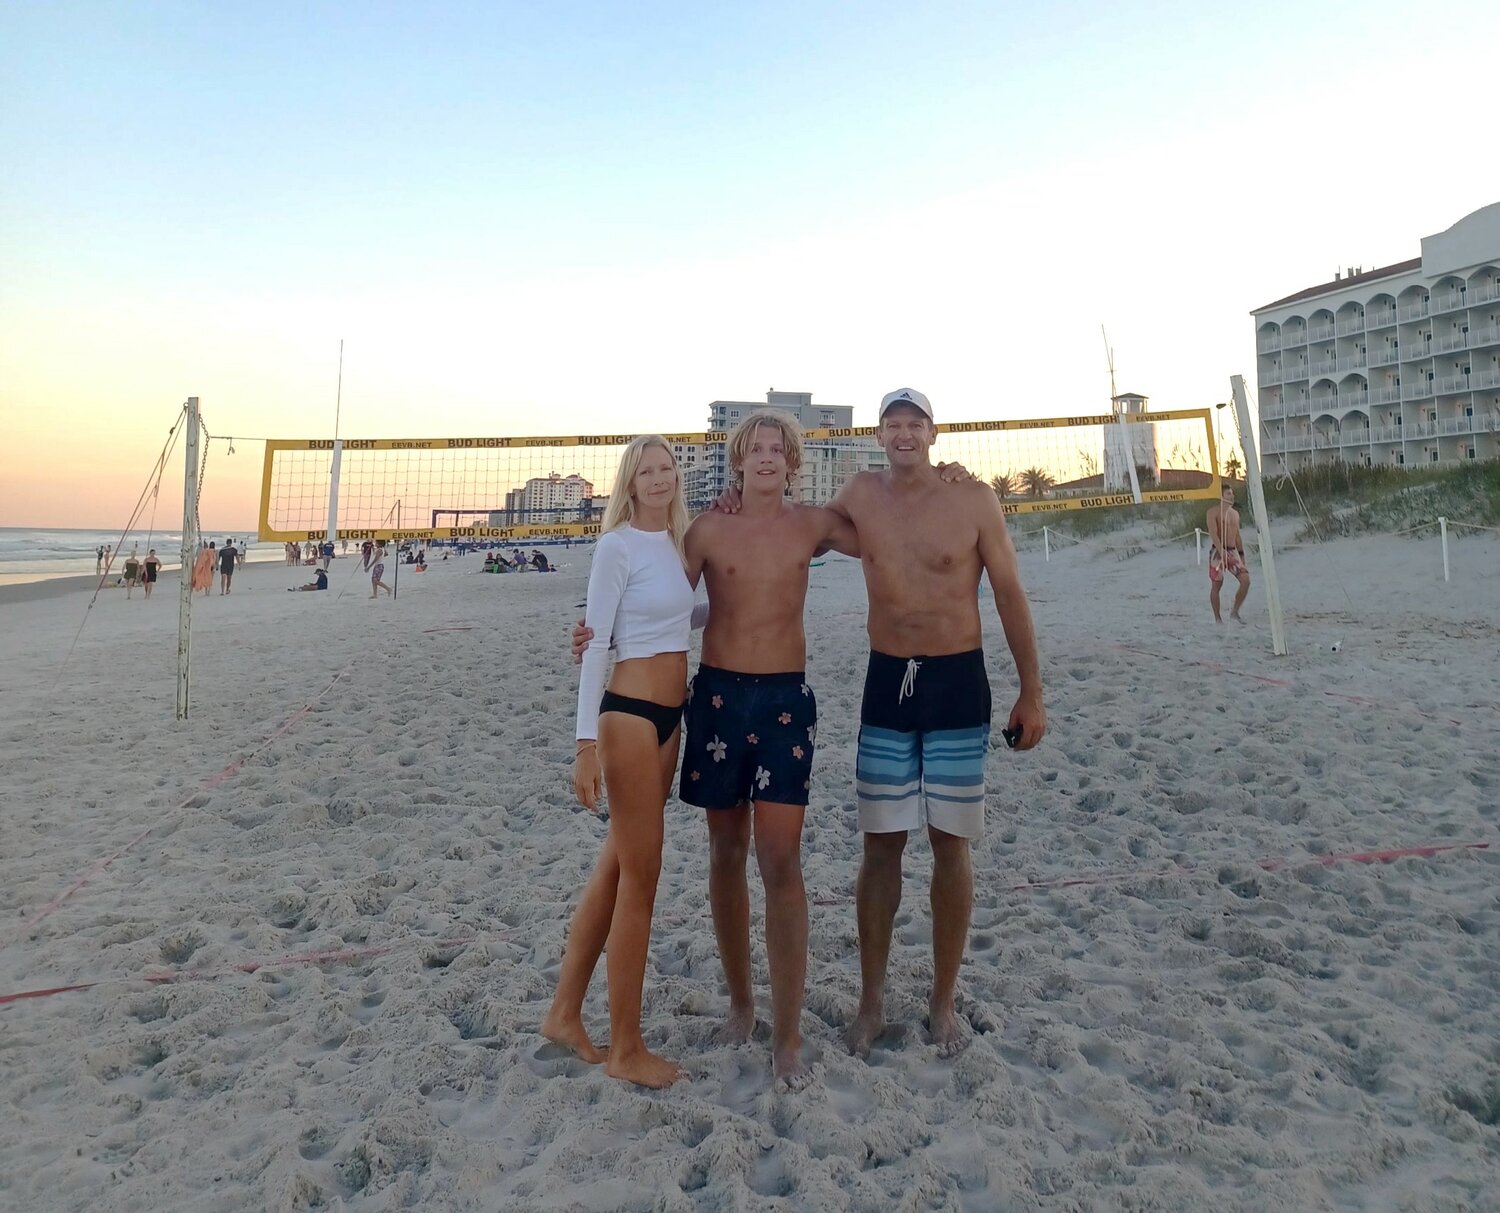 A proud family moment. Vanessa Summers-Gyulai, left, congratulates son Thor Gyulai-Summers and her husband, Andor Gyulai, right, after the father-son pair won the championship game in a recent AA Jacksonville Beach volleyball tournament. At ages 16 and 47, Thor and Andor represented the youngest and oldest players in the tournament, going undefeated in every game through the championship.